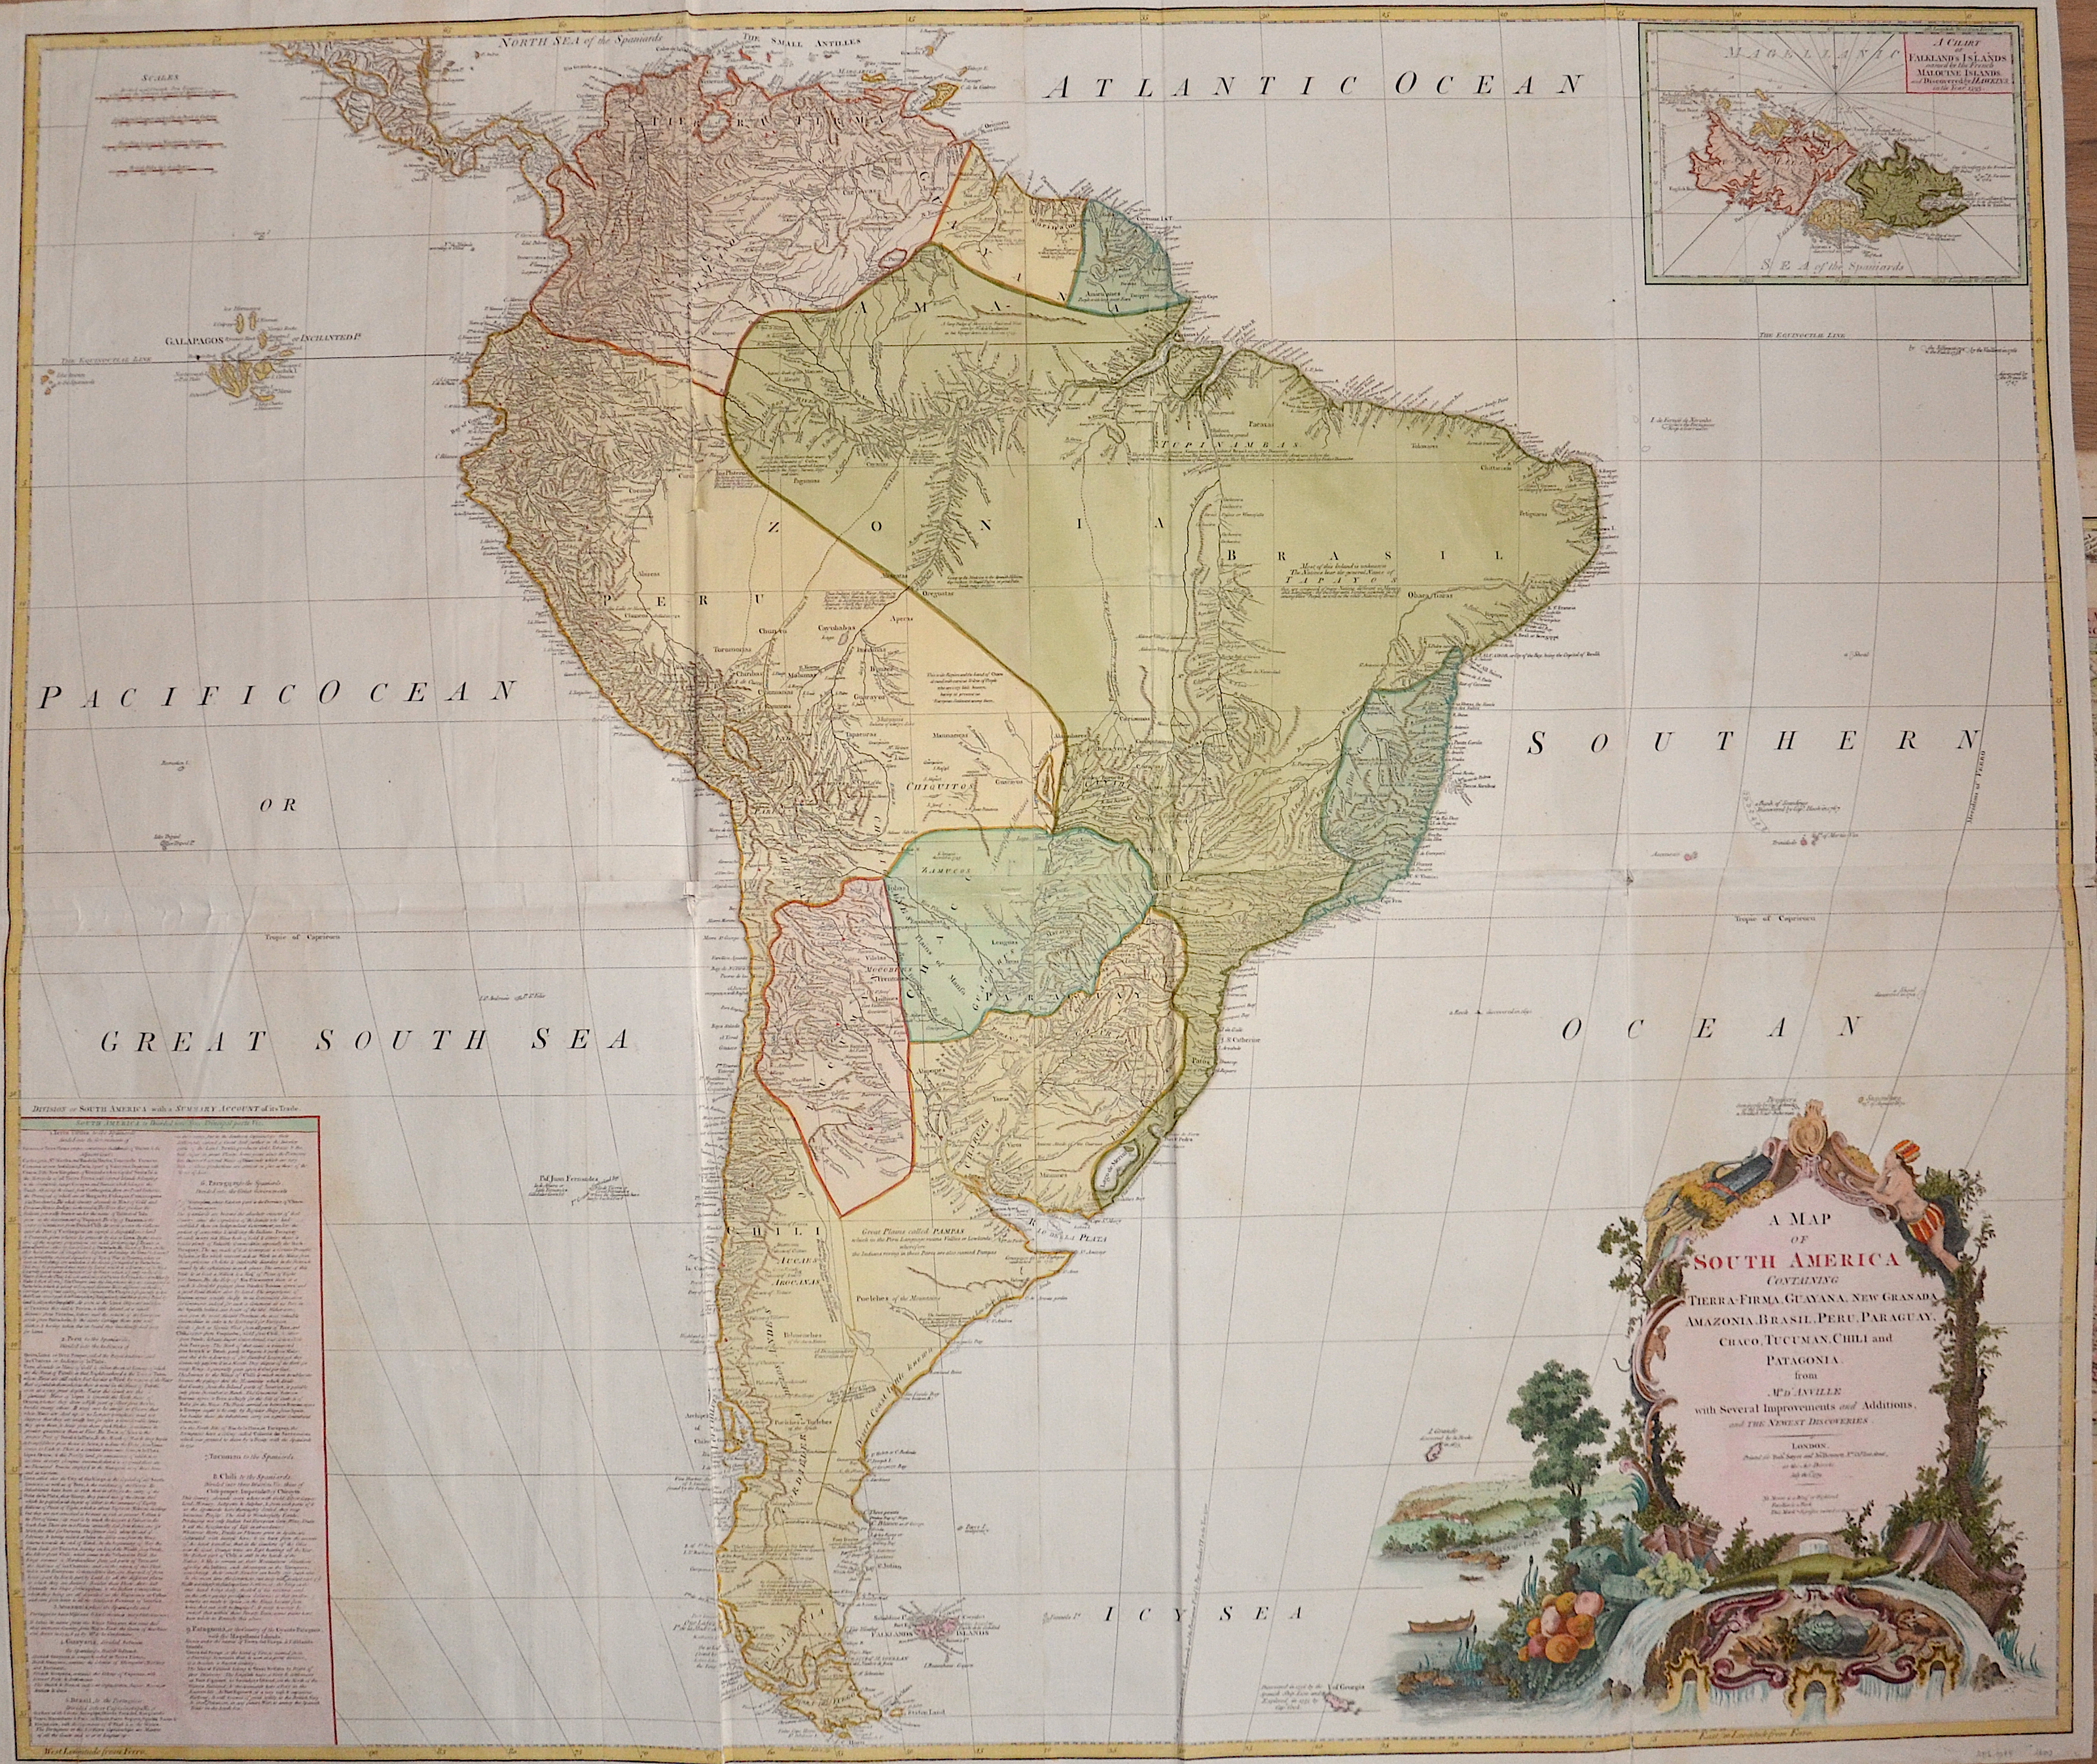 Anville´d Jean Babtiste A Map of South America Containing Tierra-Firma, Guayana, New Granada, Amazonia, Brasil, Peru, Paraguay, Chaco, Tucuman, Chili and Patagonia.